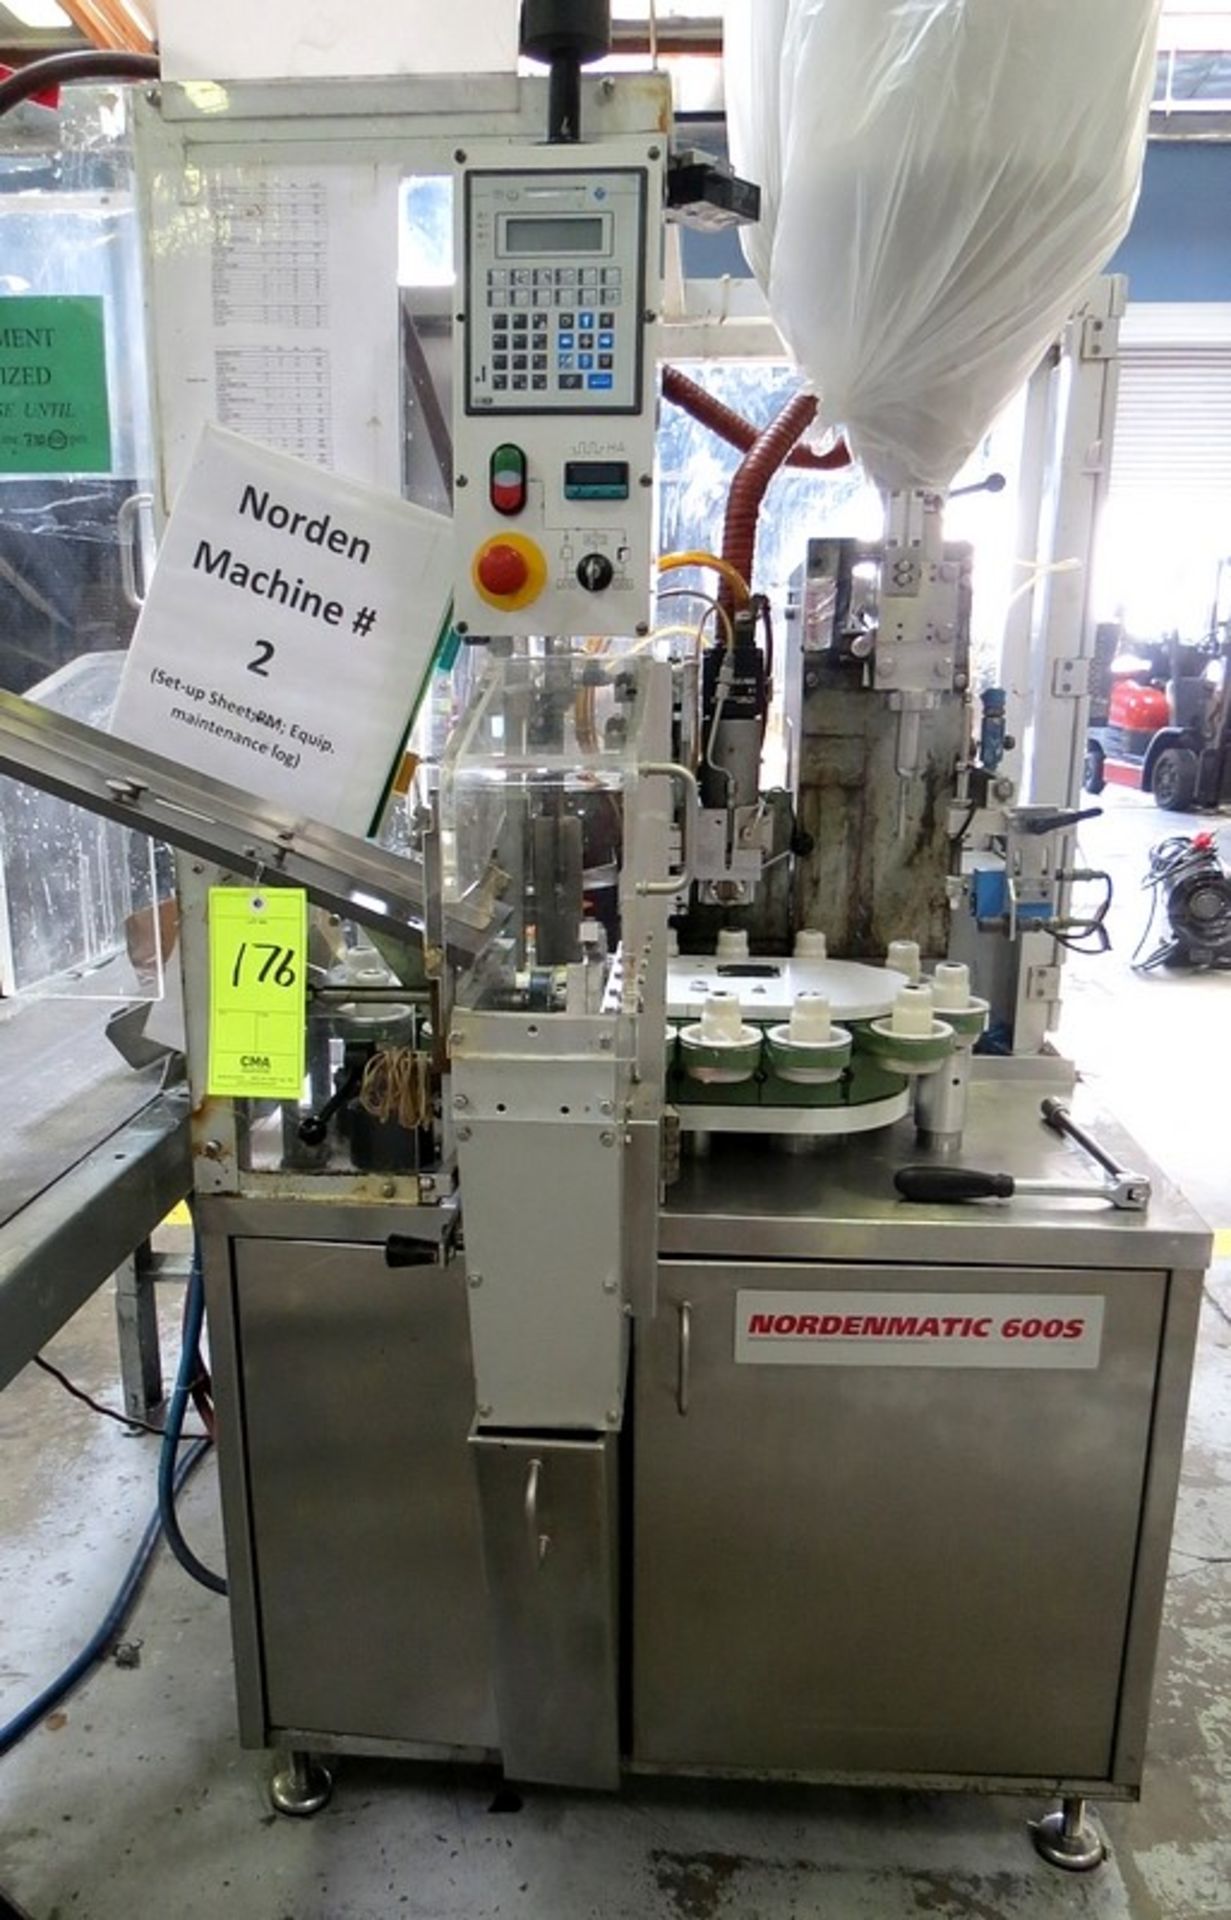 NORDEN 600 SERIES NORDENMATIC HOT AIR TUBE FILLING/SEALING MACHINES WITH ELECTRONIC KEY CONTROLS,